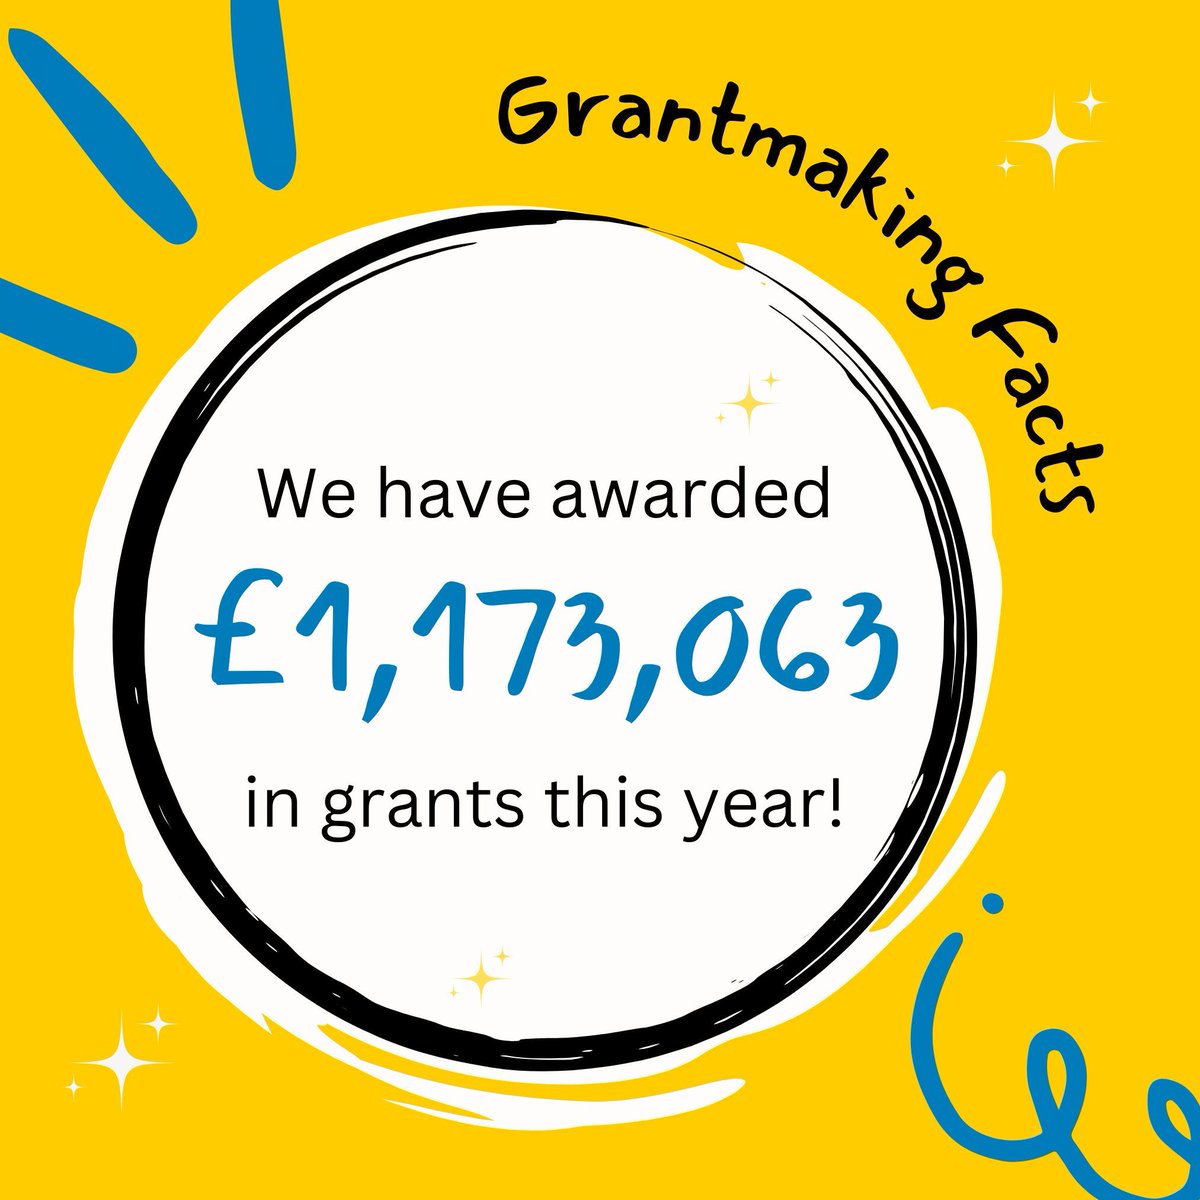 We’re delighted to have awarded over £1.1 million in grants so far this year! Want to find out more? Head on over to our website for all the latest grant information, or to become a donor ⭐ buff.ly/3czhaBt